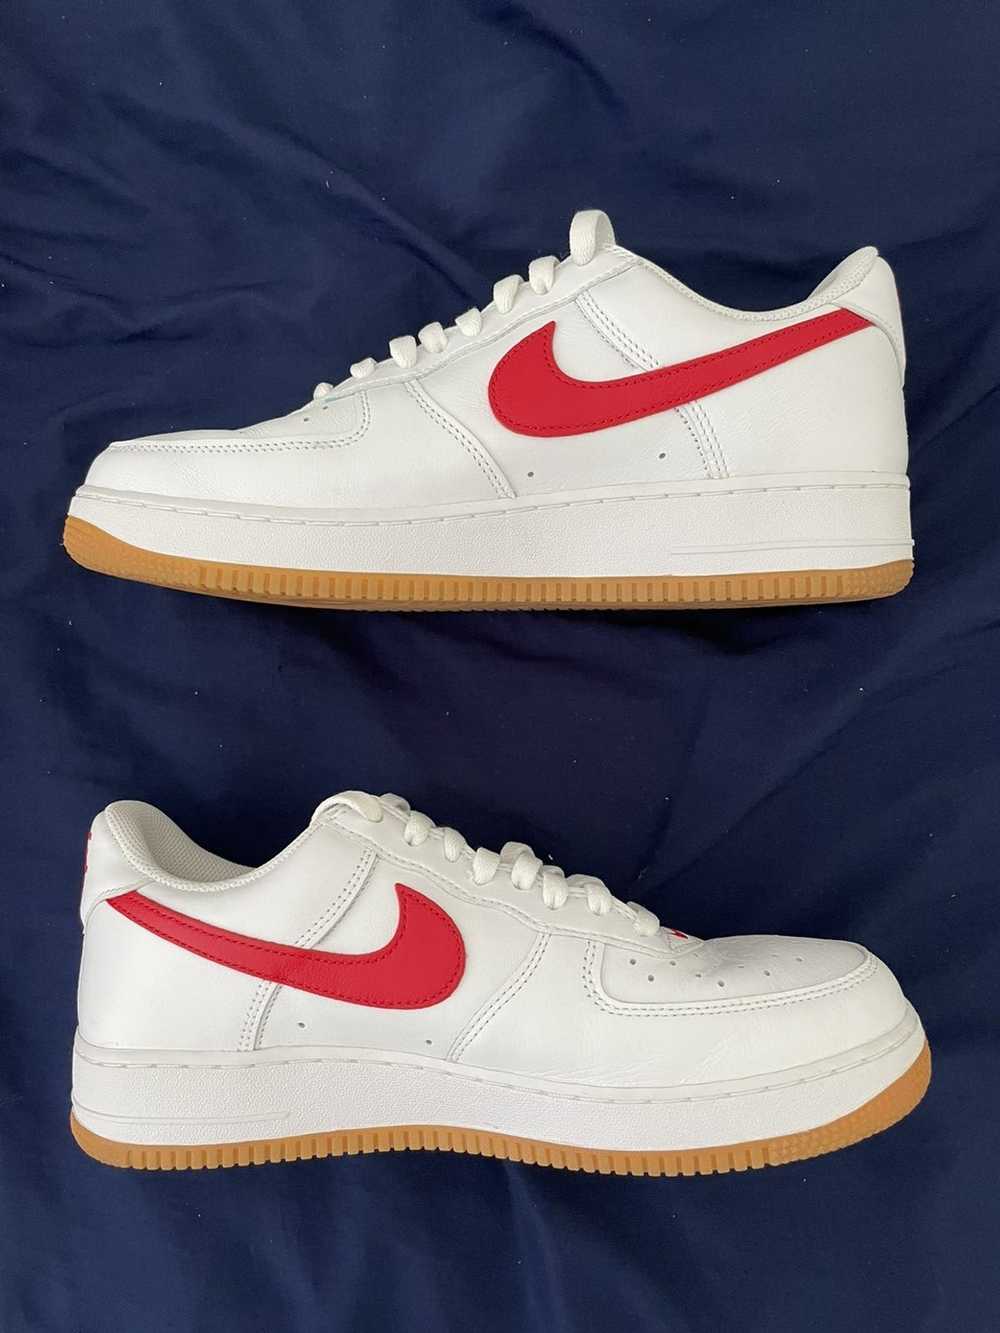 Nike Nike Air Force One Color of the month - image 2